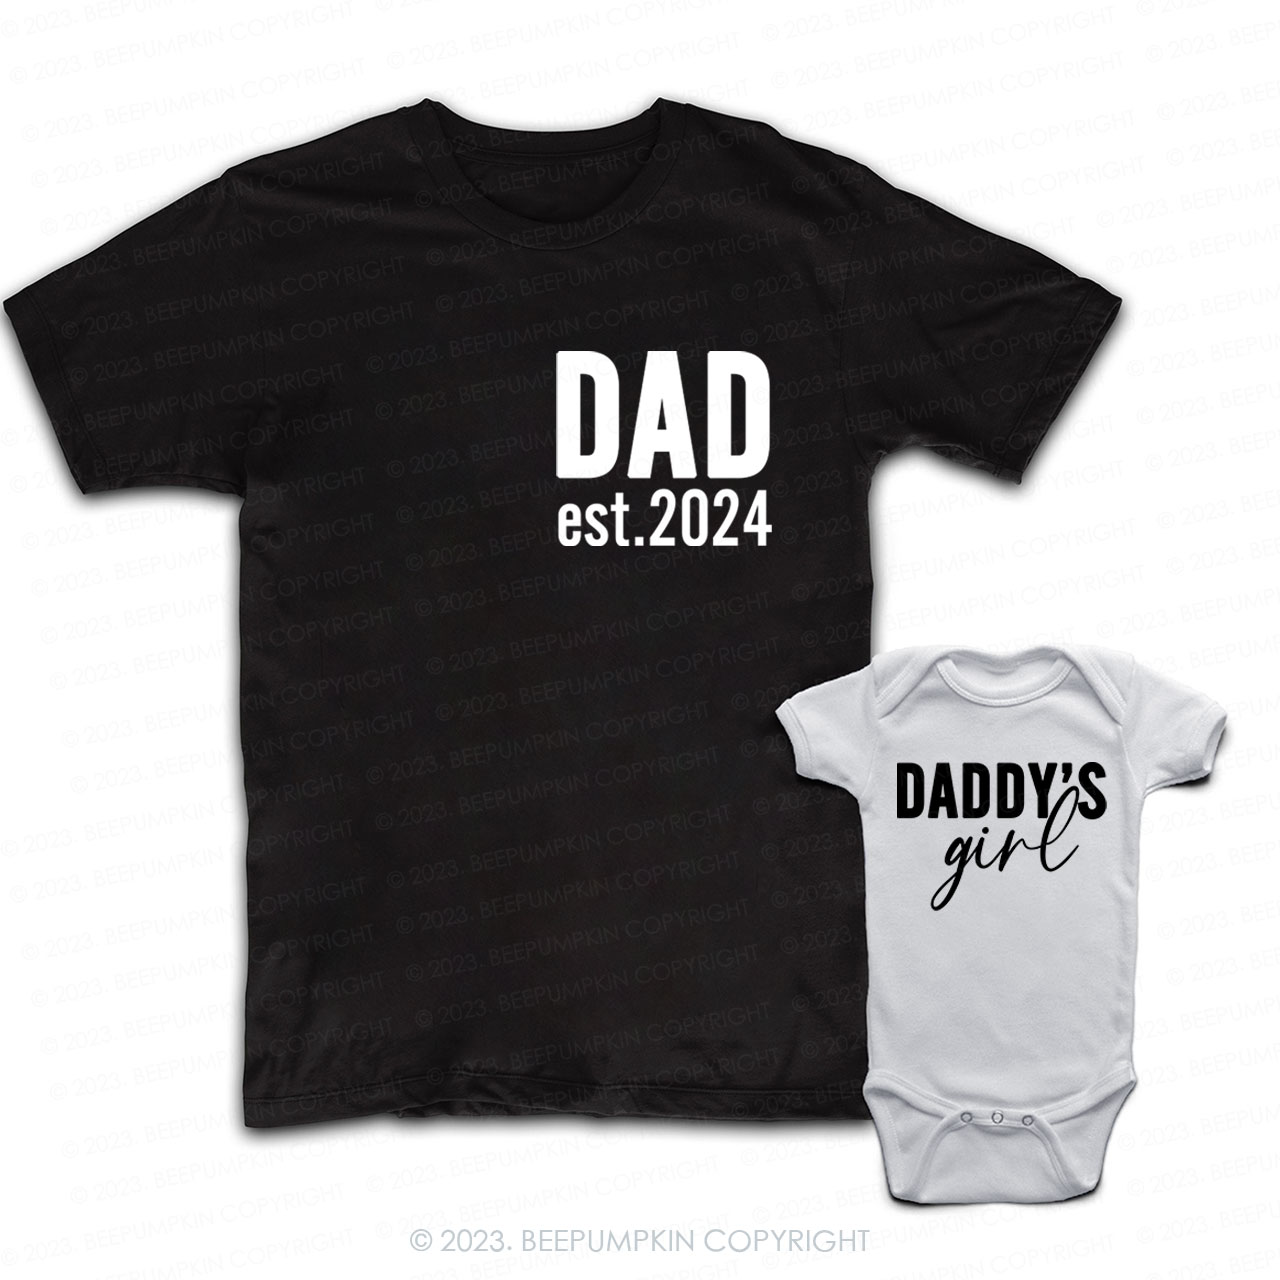 Special Dad&Dad's Boy Girl Matching Tees For Dad & Me